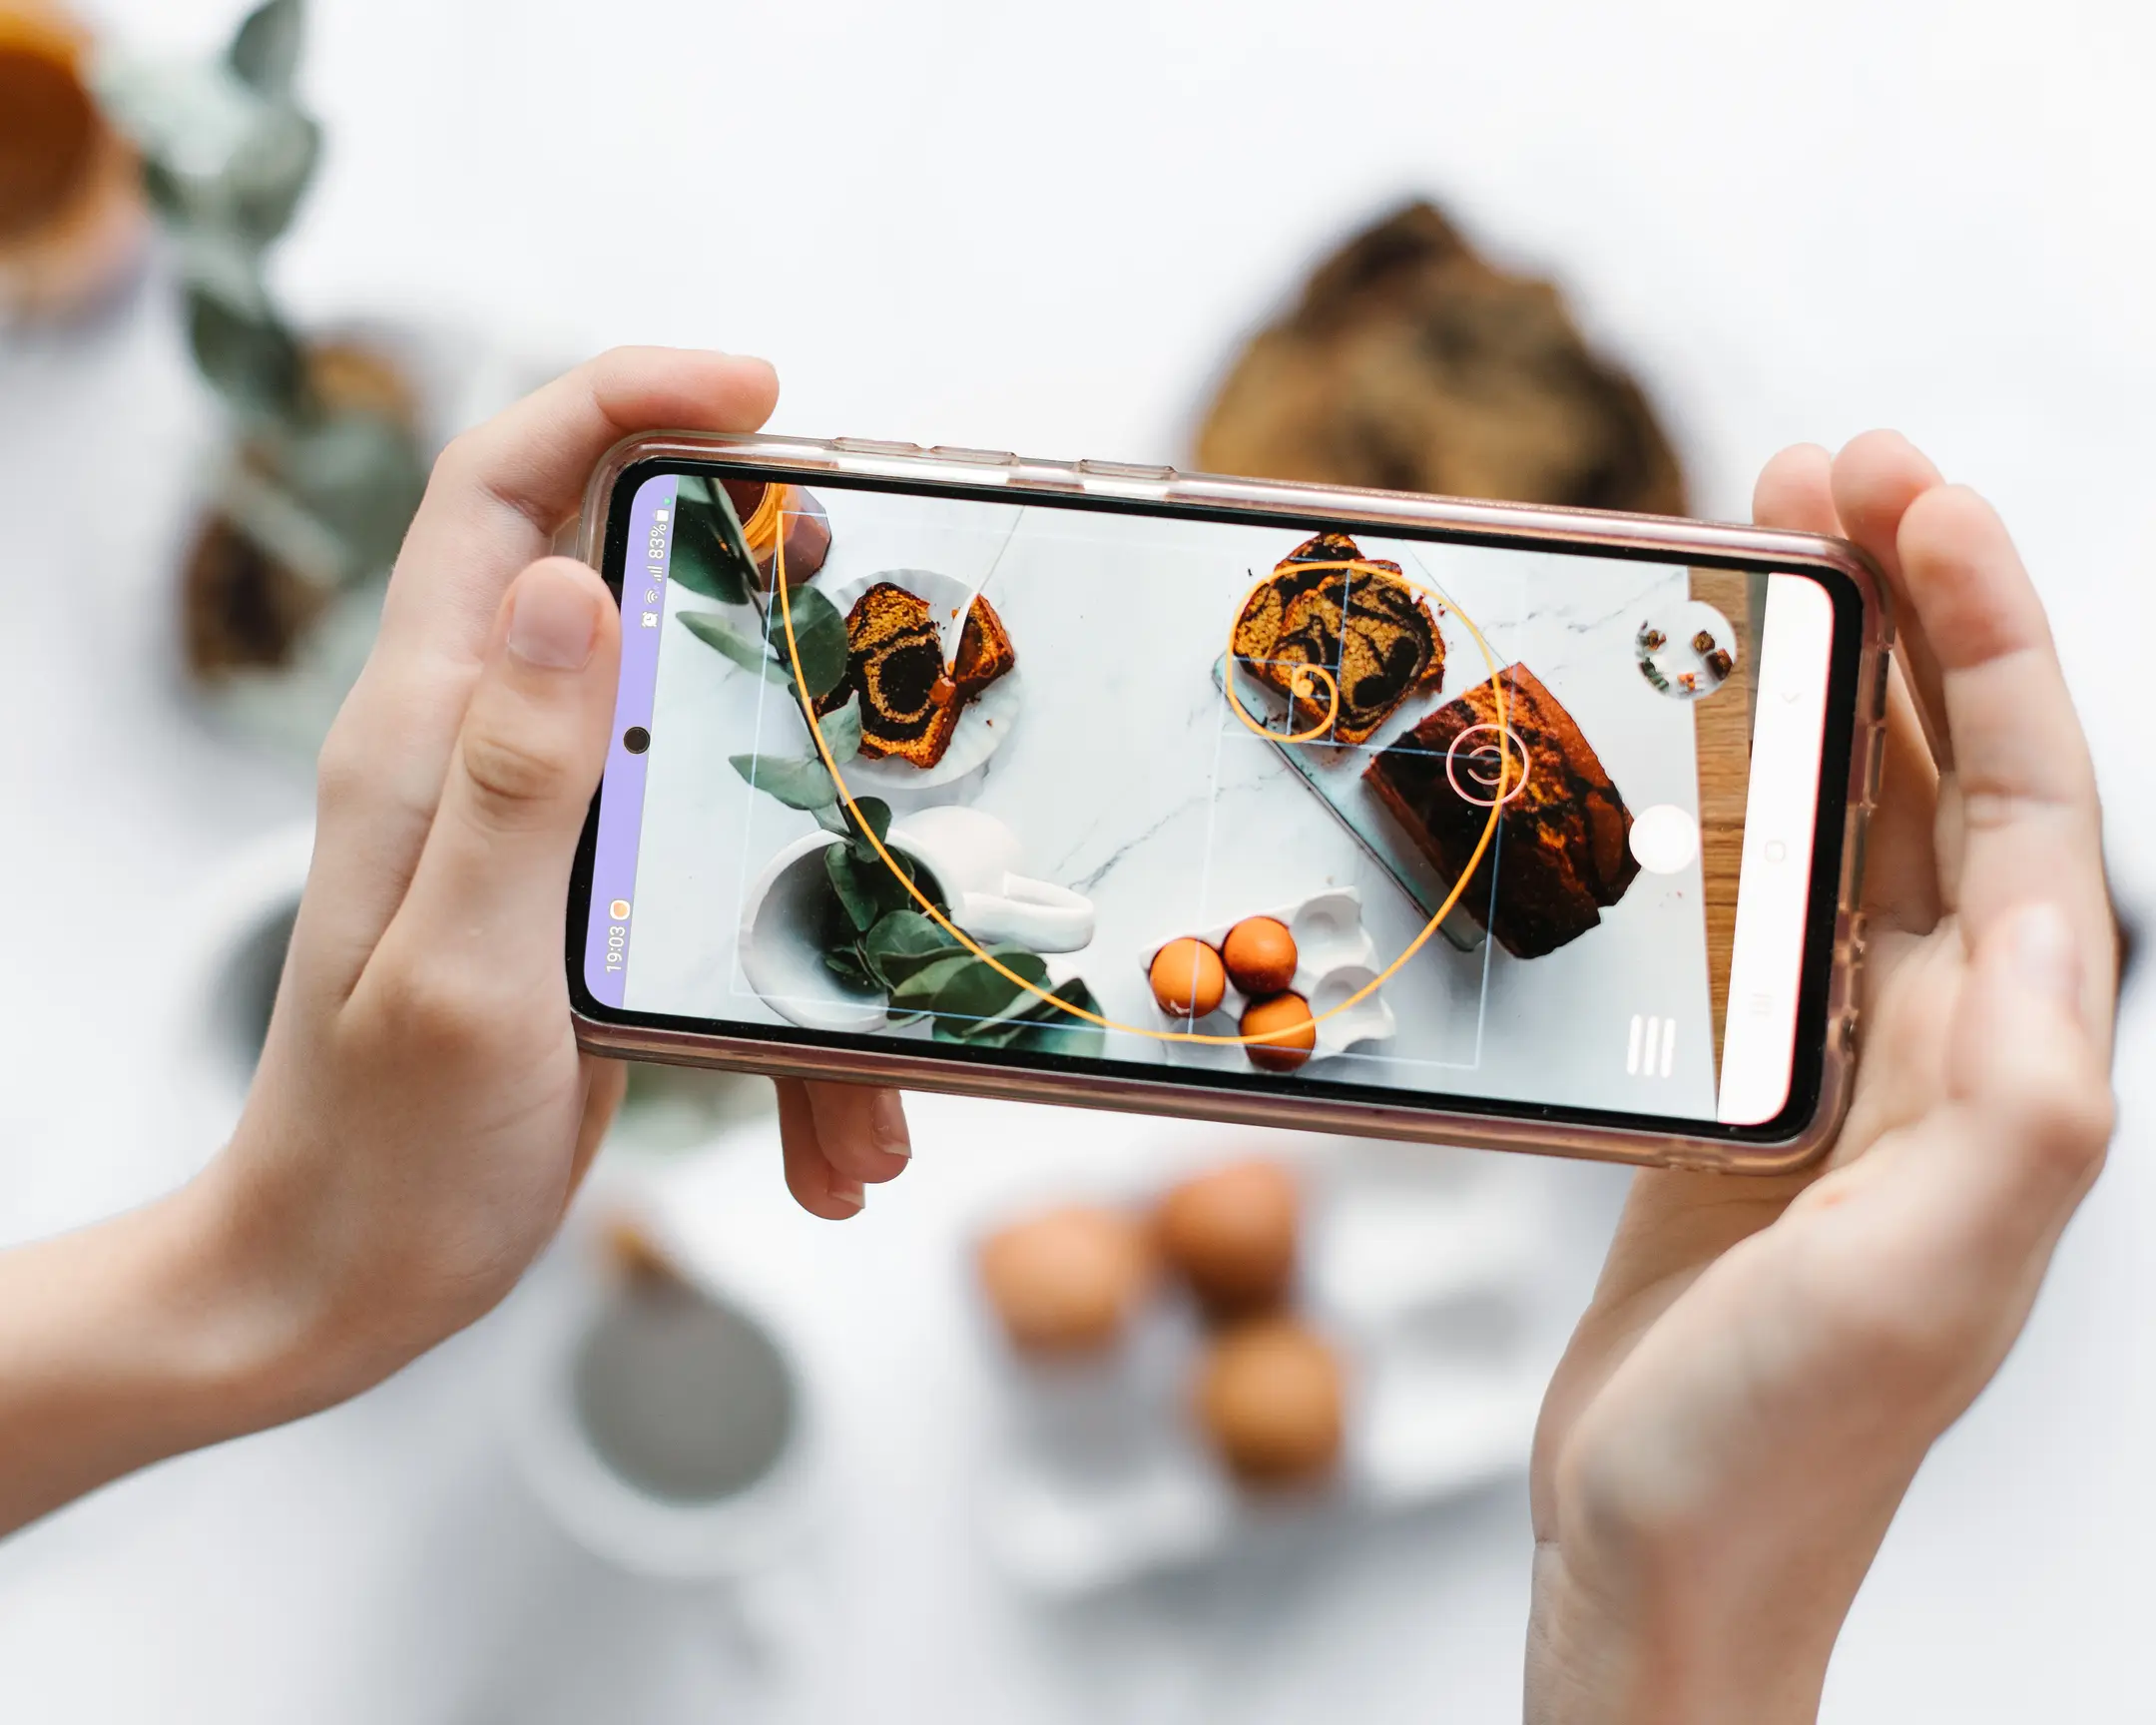 Awesome Photo application - golden spiral. A person holding a phone demonstrating the Awesome Photo application and a golden spiral, cakes, eggs, and leaves.